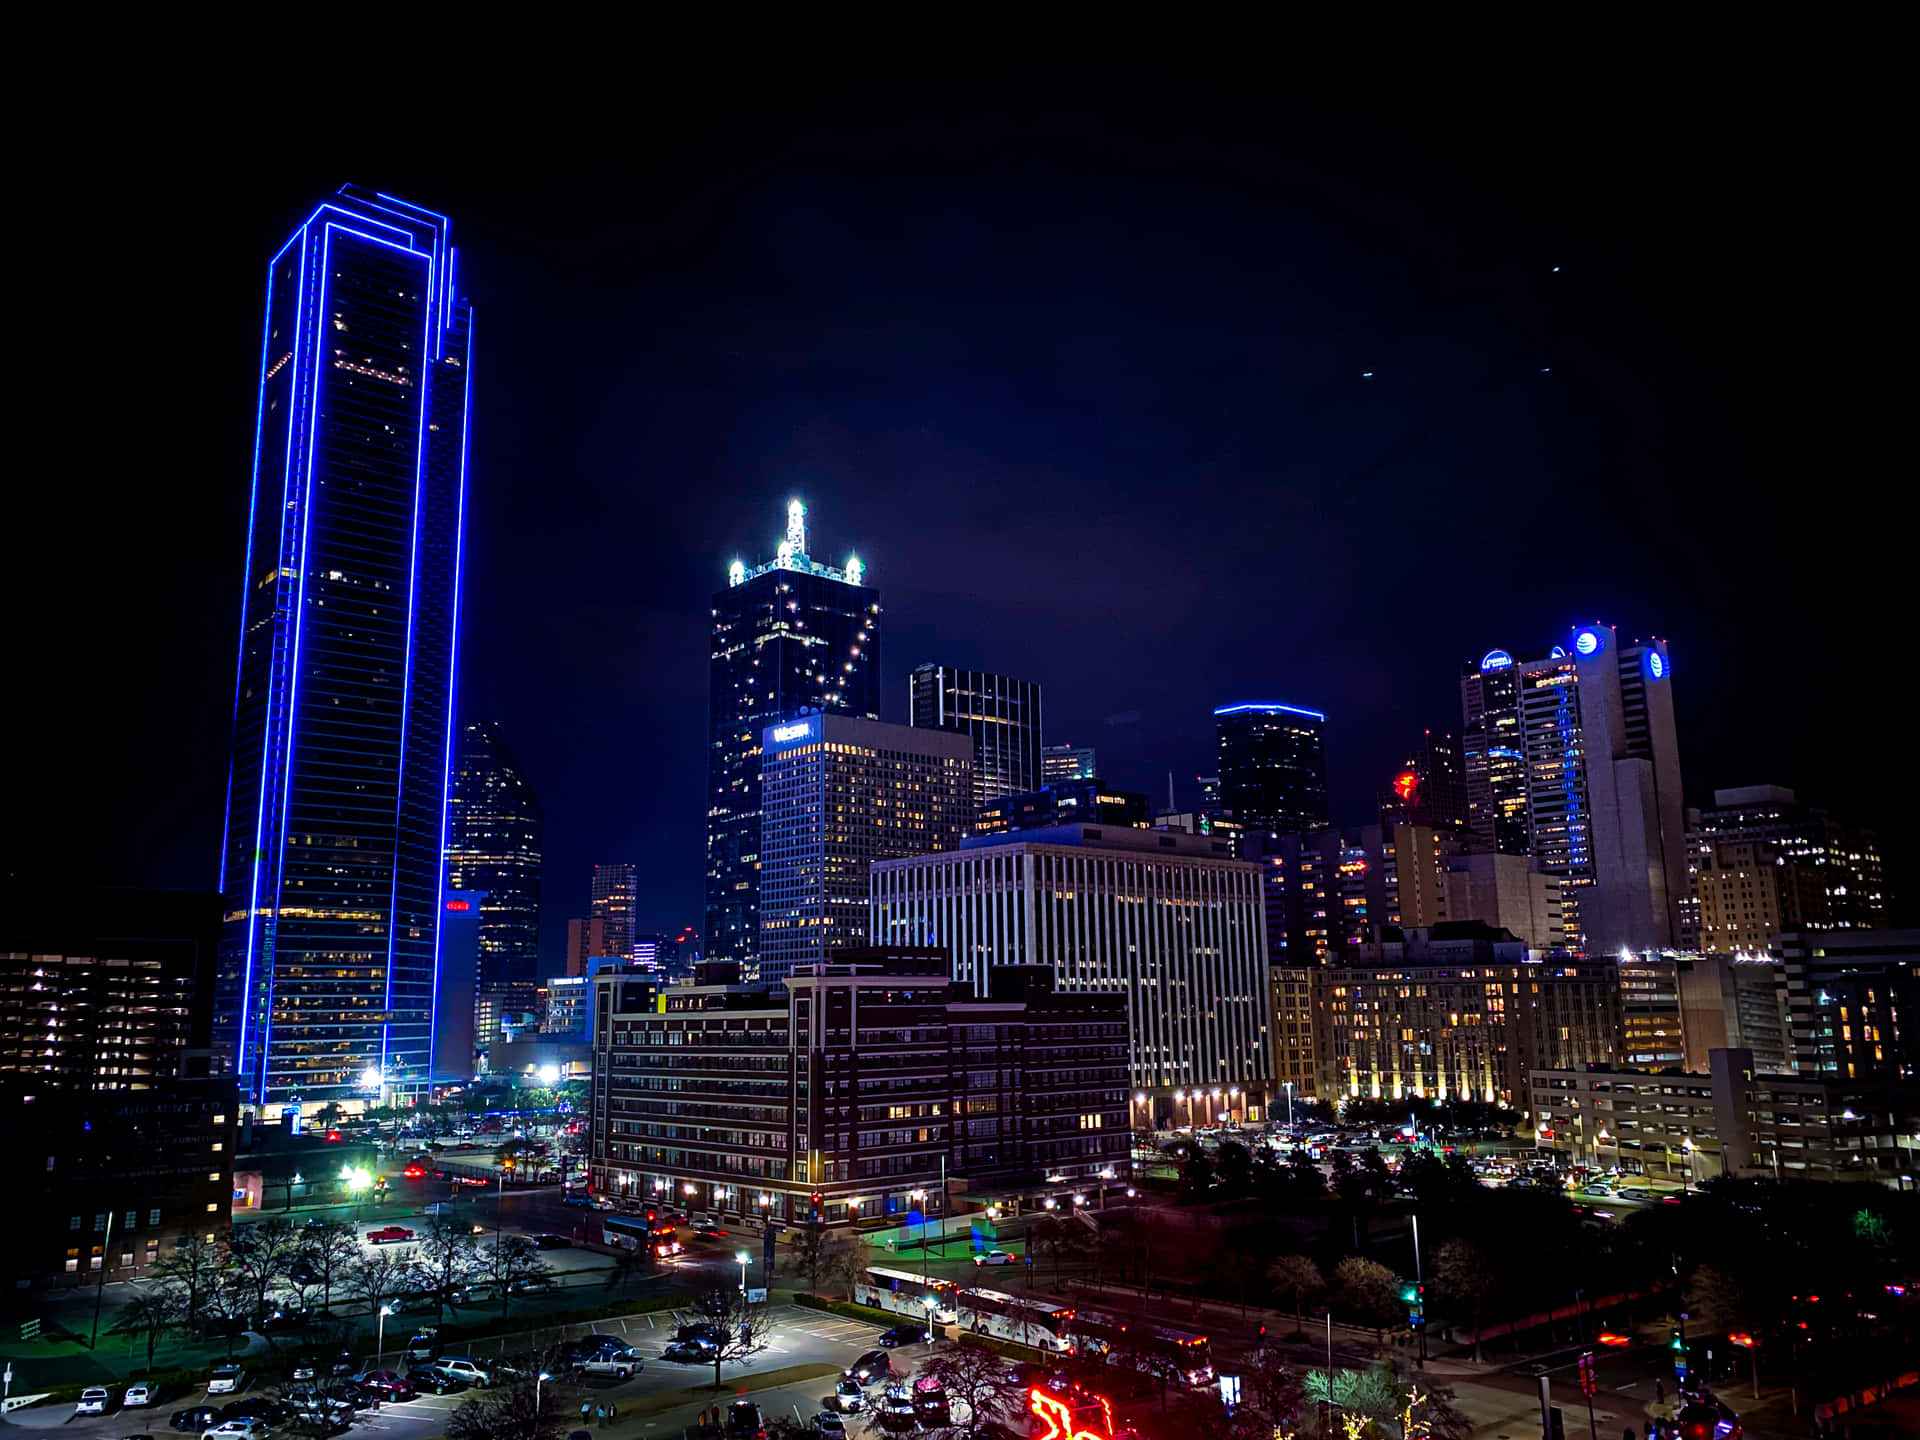 Enjoy The Magnificent Skyline Of Dallas, Texas